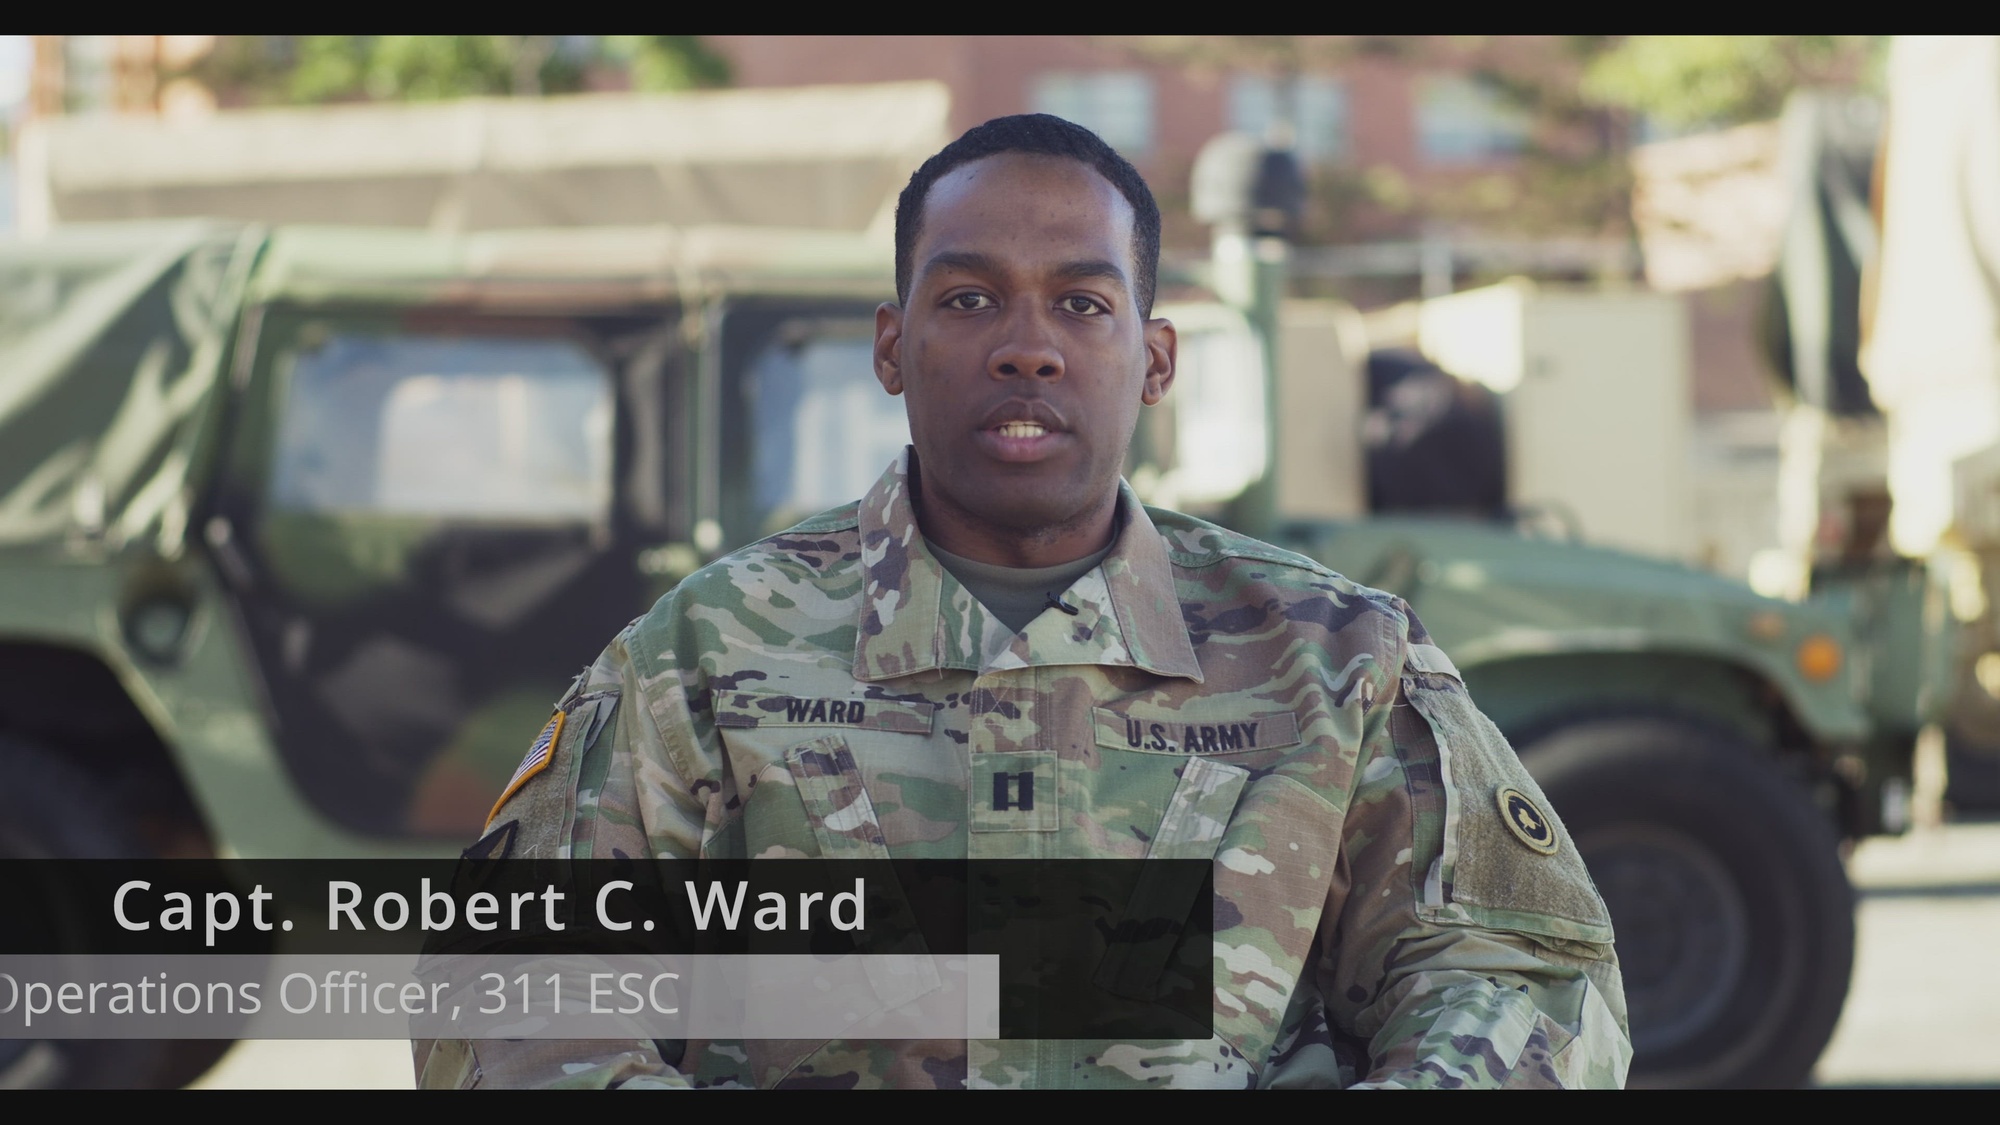 Remembering and celebrating Black History Month, and the impact leaders like Capt. Ward are having across the US Army Reserve.